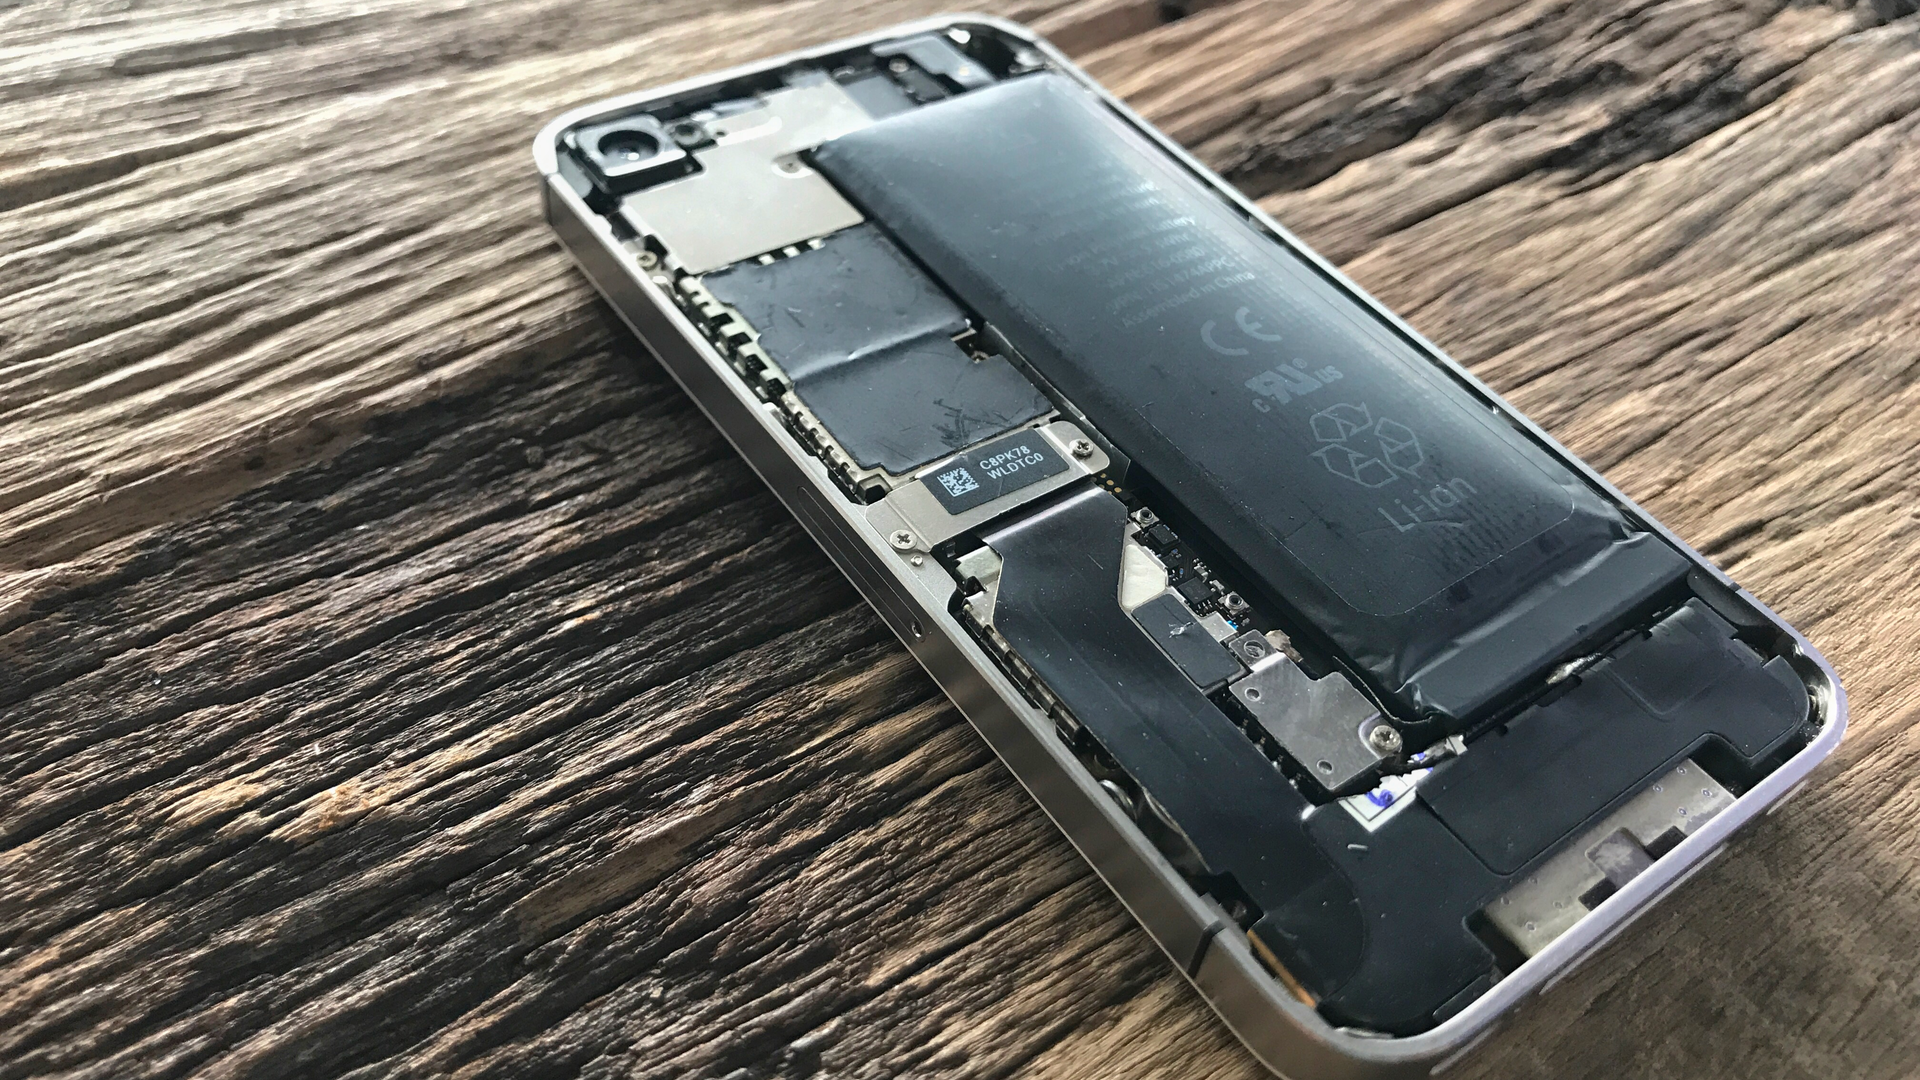 The back of a smartphone with a visibly swollen battery